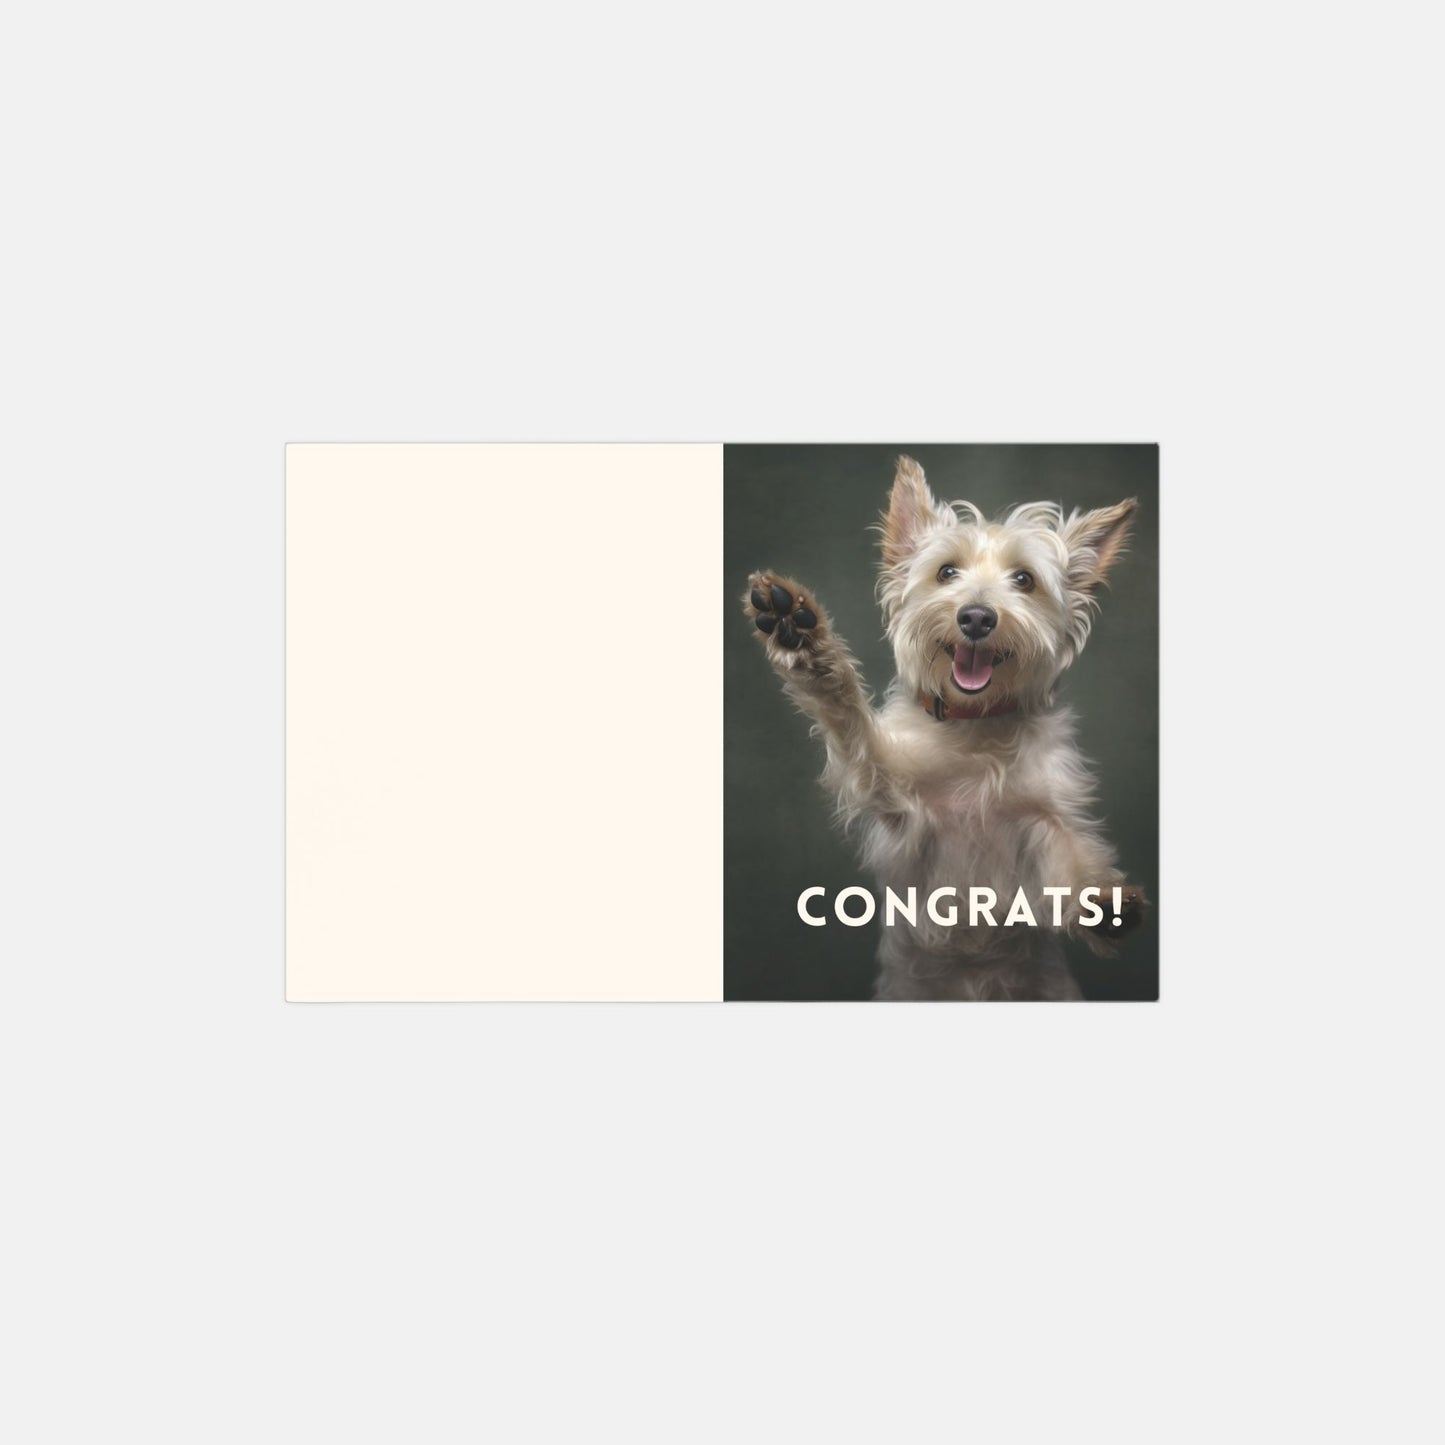 Terrier Congratulations Cards - 10 Pack